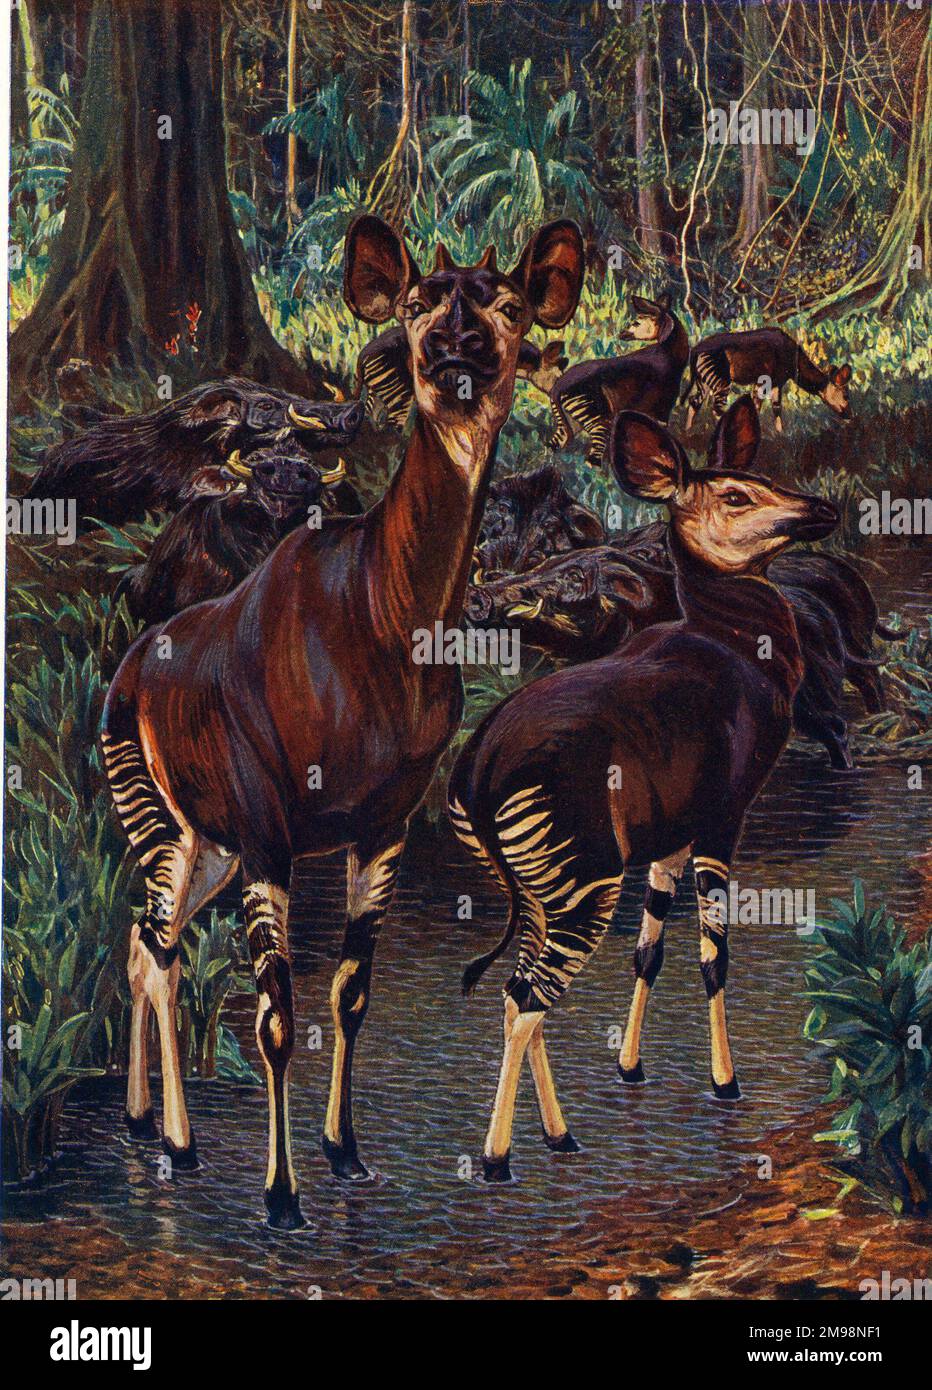 Okapi in the Congo Forest, by Sir H H Johnston. Stock Photo